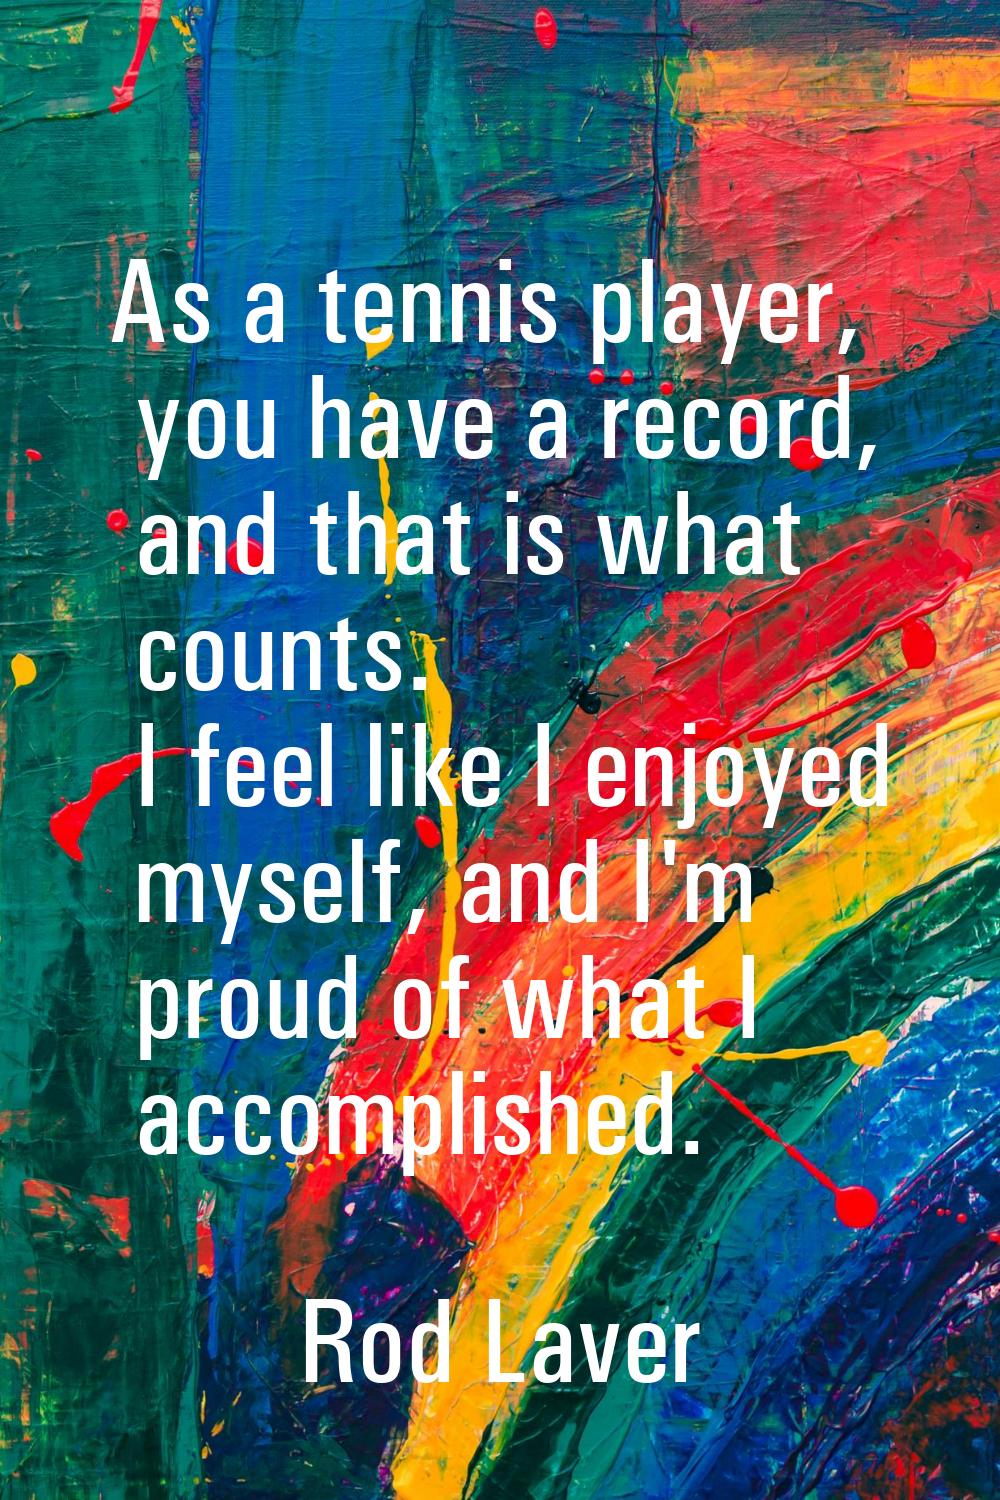 As a tennis player, you have a record, and that is what counts. I feel like I enjoyed myself, and I